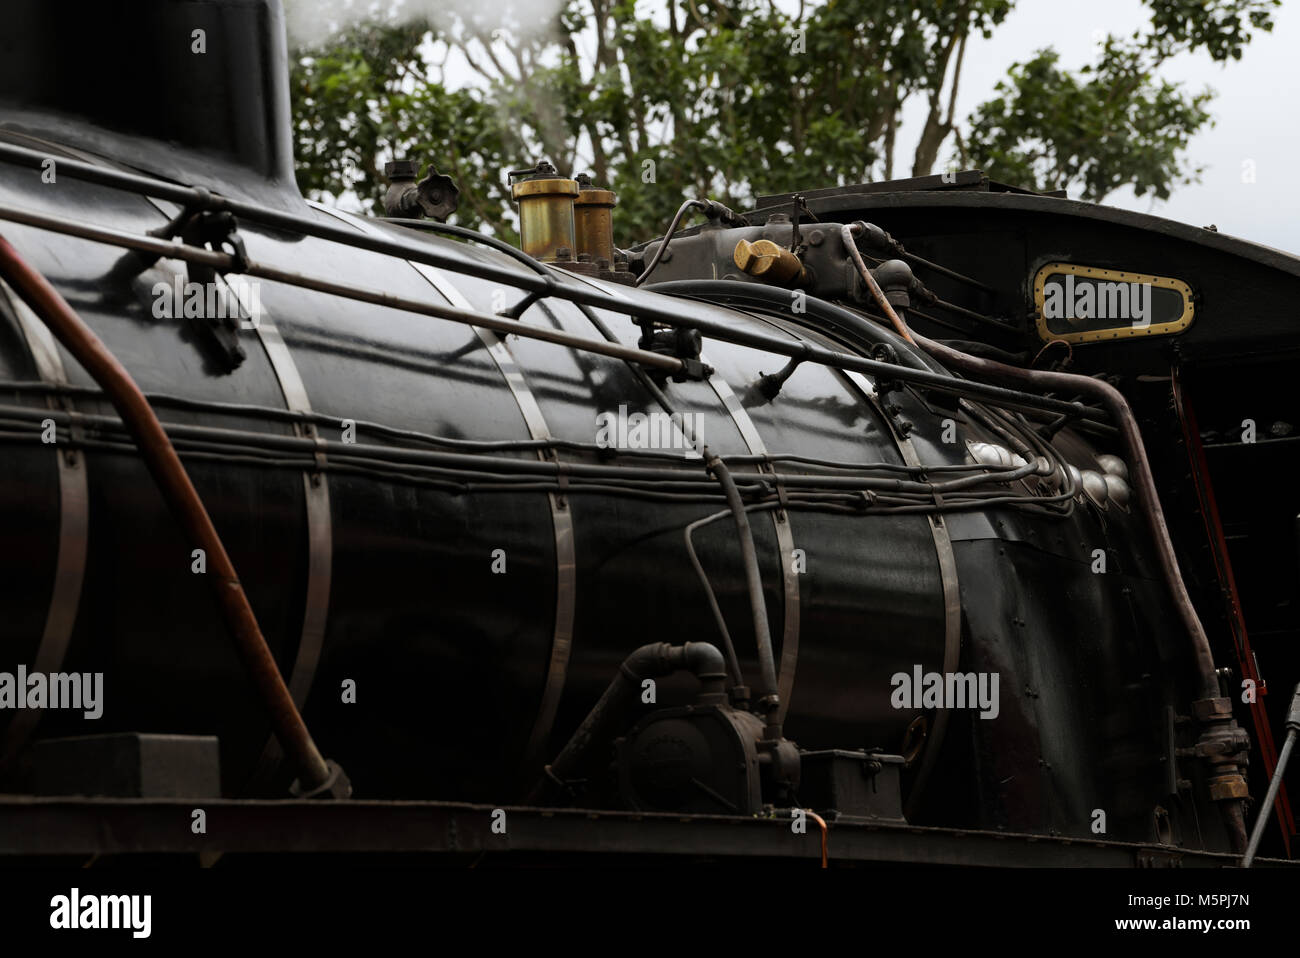 Steam escaping from a brass relief valve on a refurbished vintage D19 class steam locomotive Stock Photo